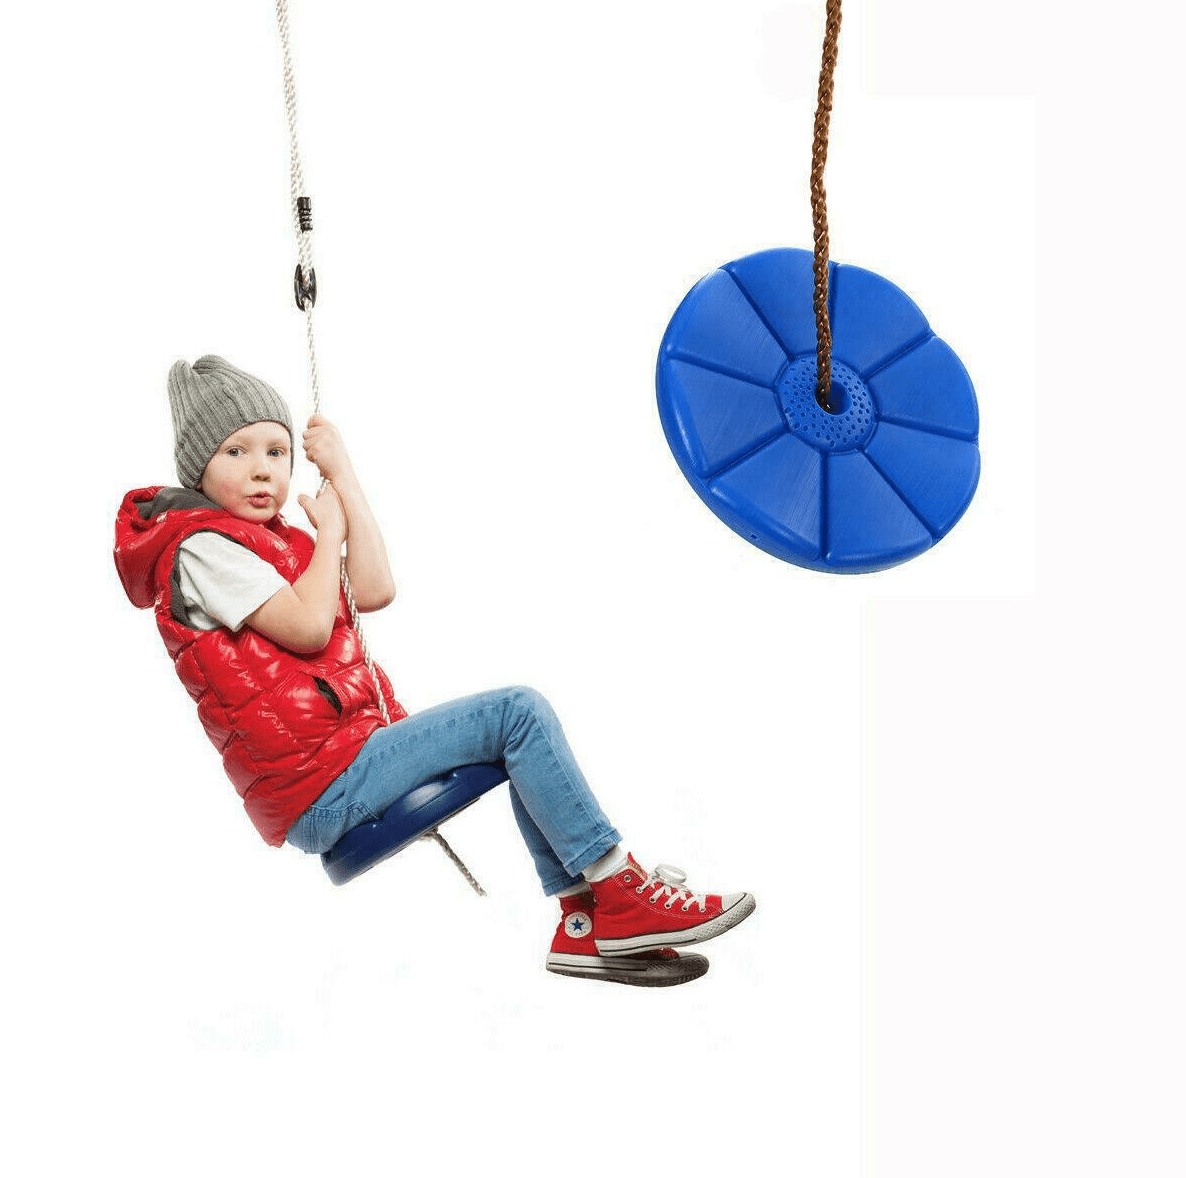 ALL COLORS Playground With Rope Outdoor tree swing DAISY DISC SWING SEAT BLUE 